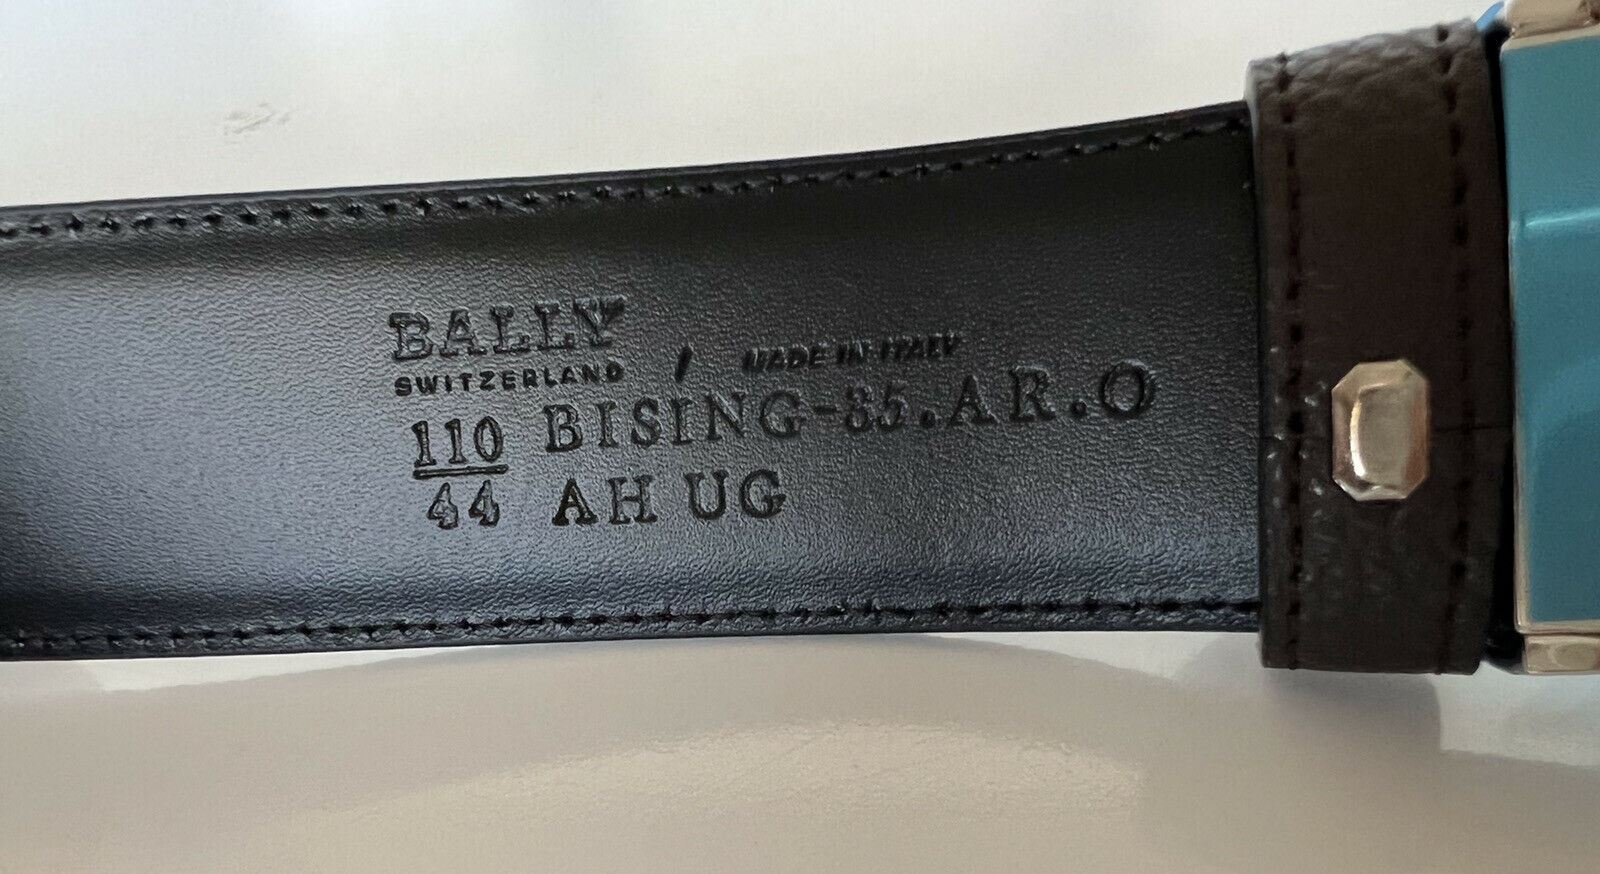 NIB $290 Bally Mens Double Sided Bising Leather Belt Size 44/110